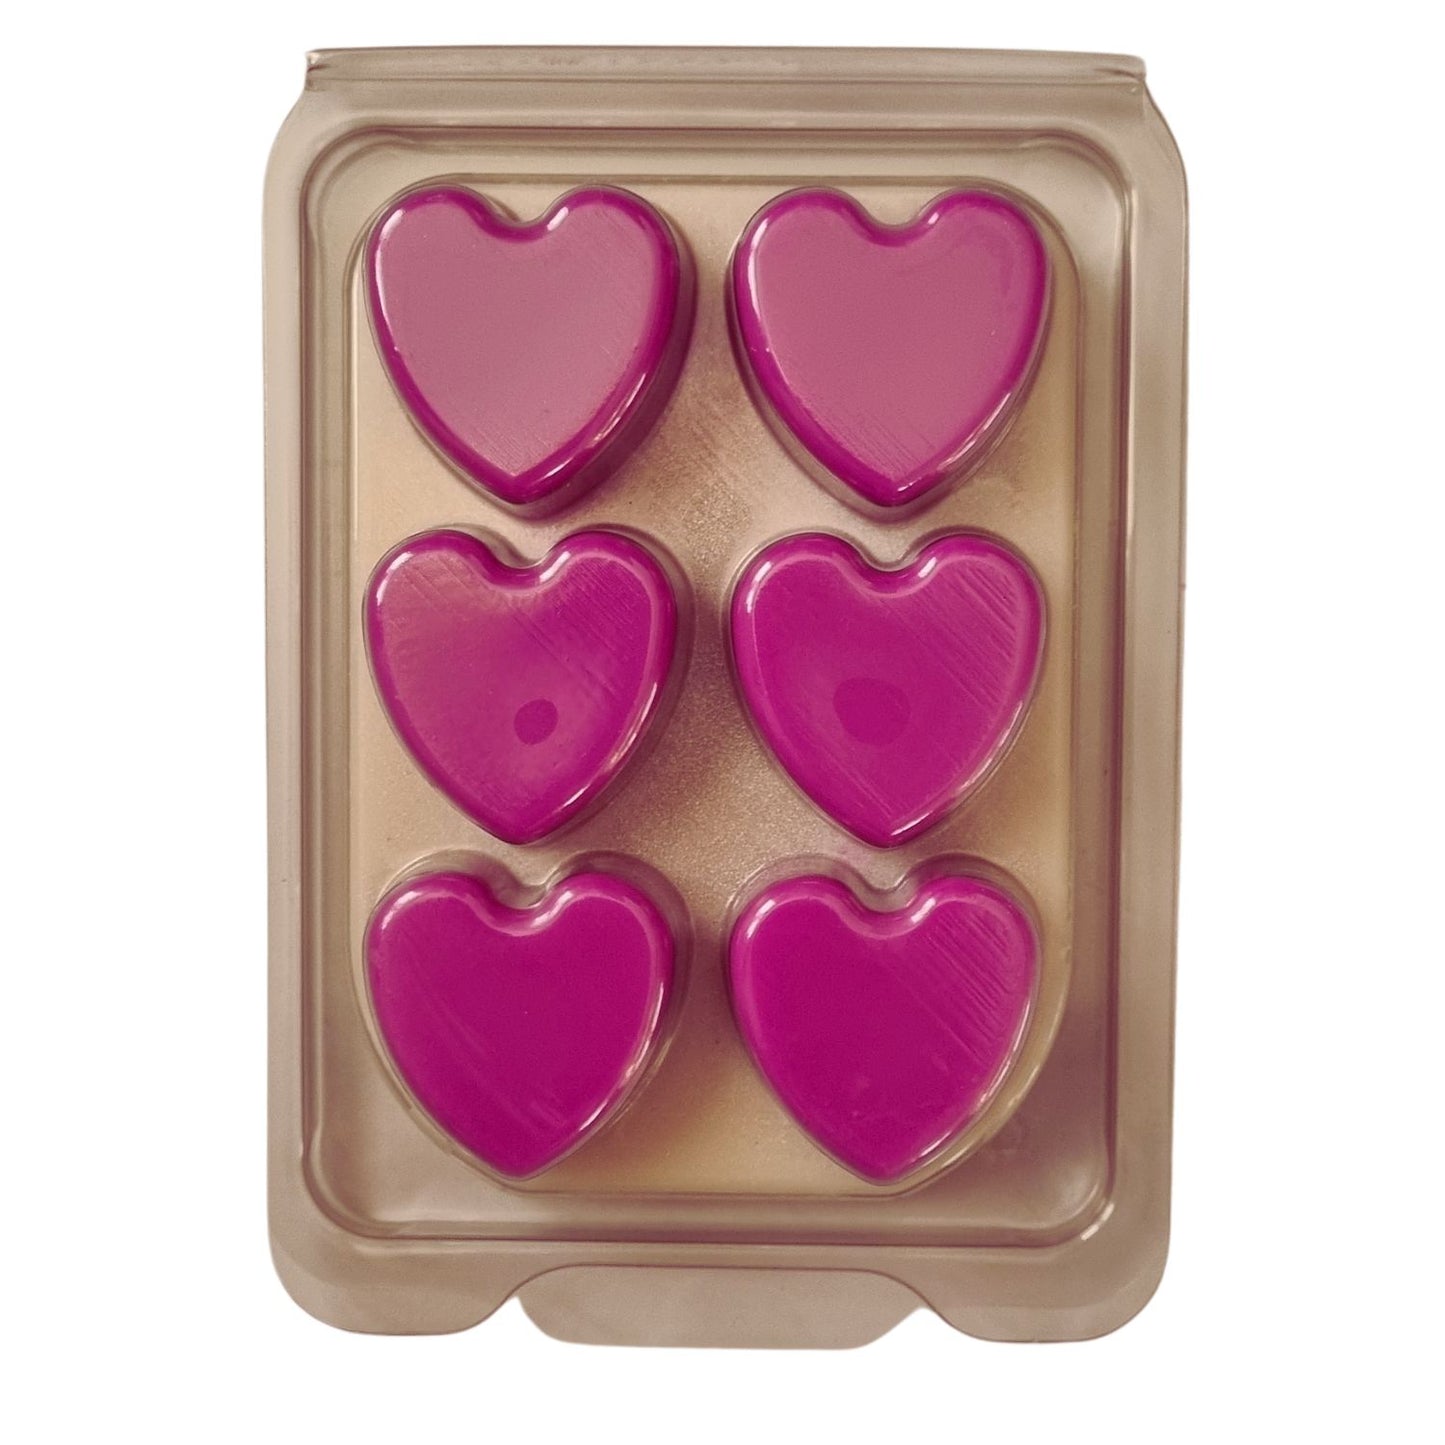 Scented Soy Wax Melts in hearts Clamshell with 6 bright pink Hearts on white wax melt background